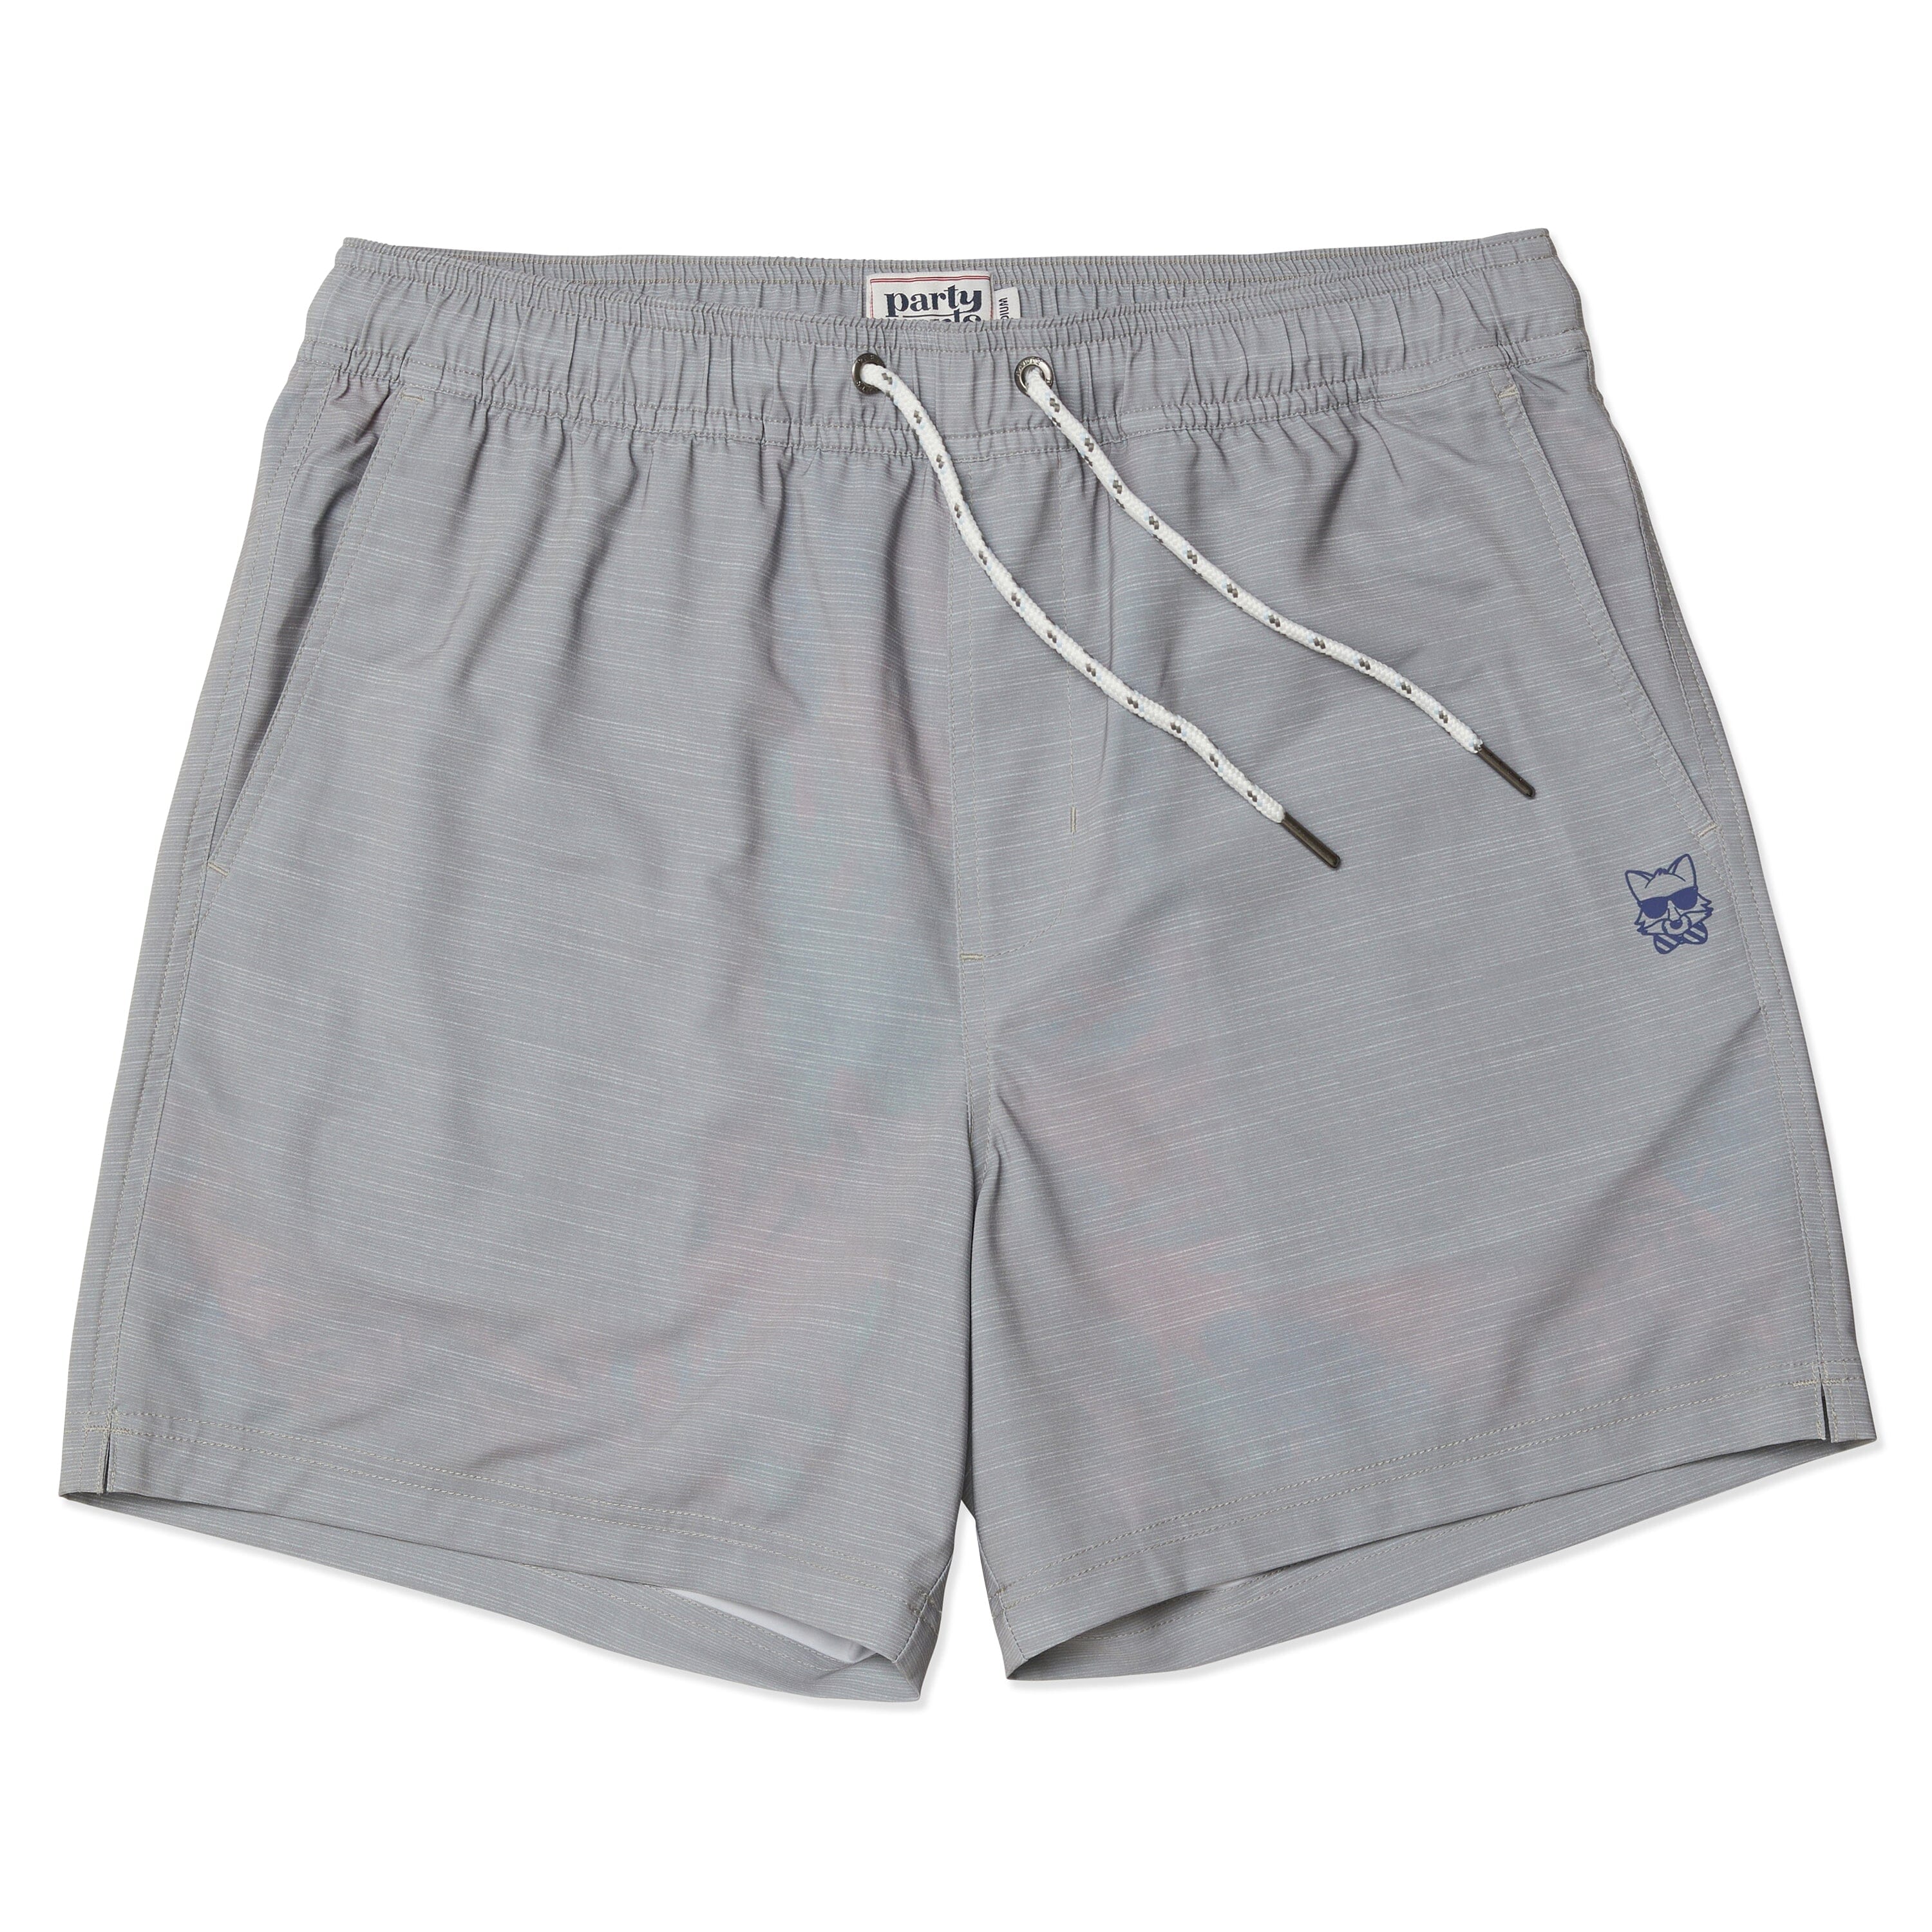 SOLID SPORT LINED SHORT - GREY SPORT SHORTS PARTY PANTS 